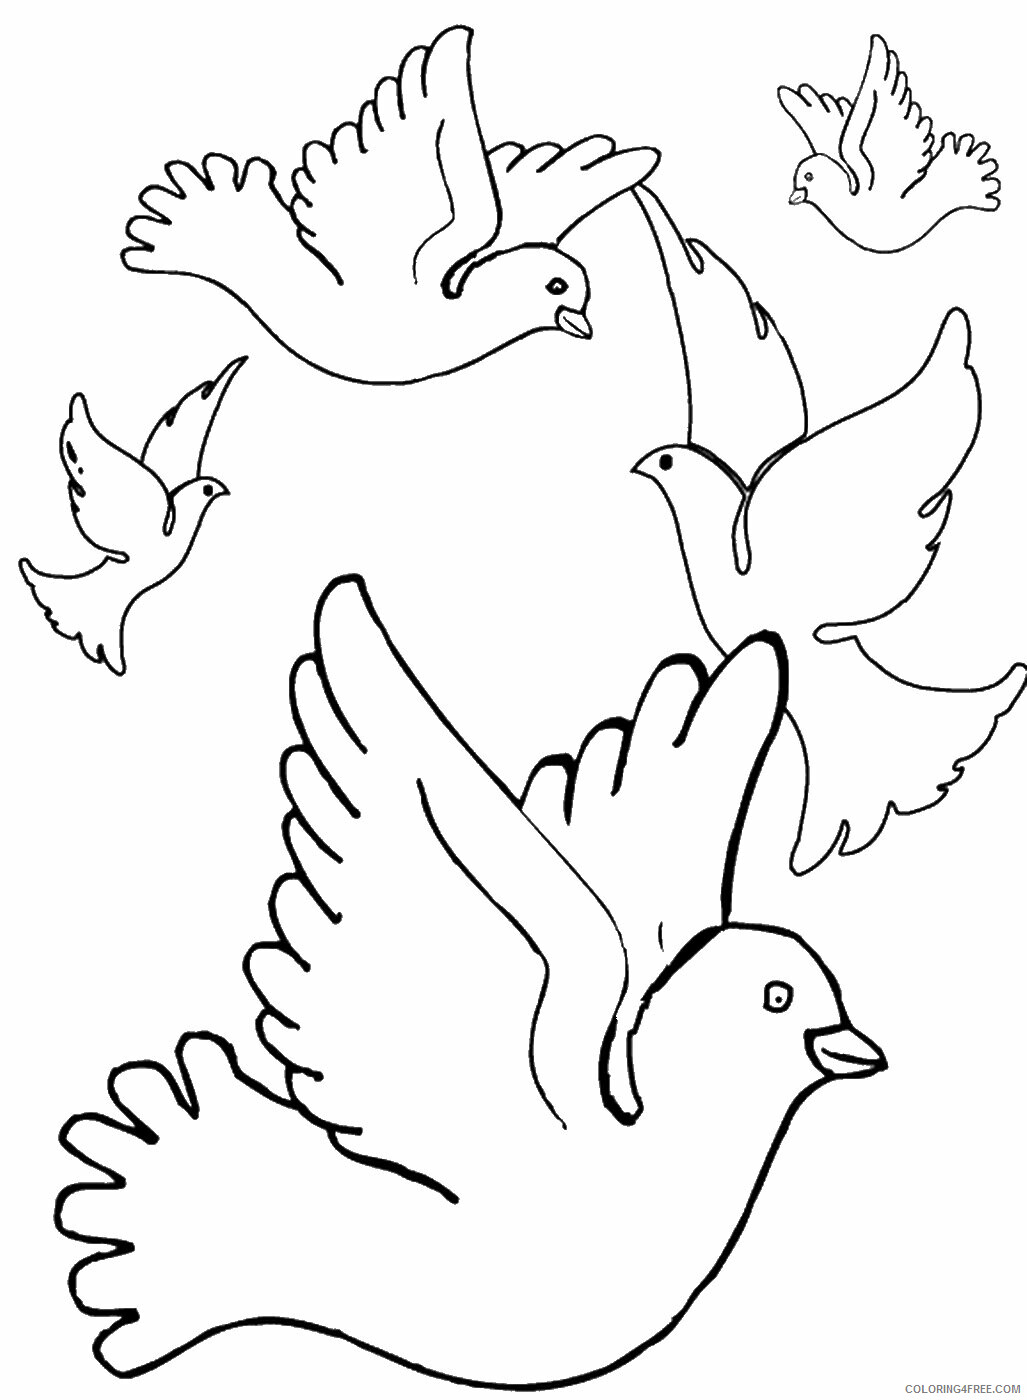 Pigeon Coloring Pages Animal Printable Sheets pigeon_cl_12 2021 3929 Coloring4free